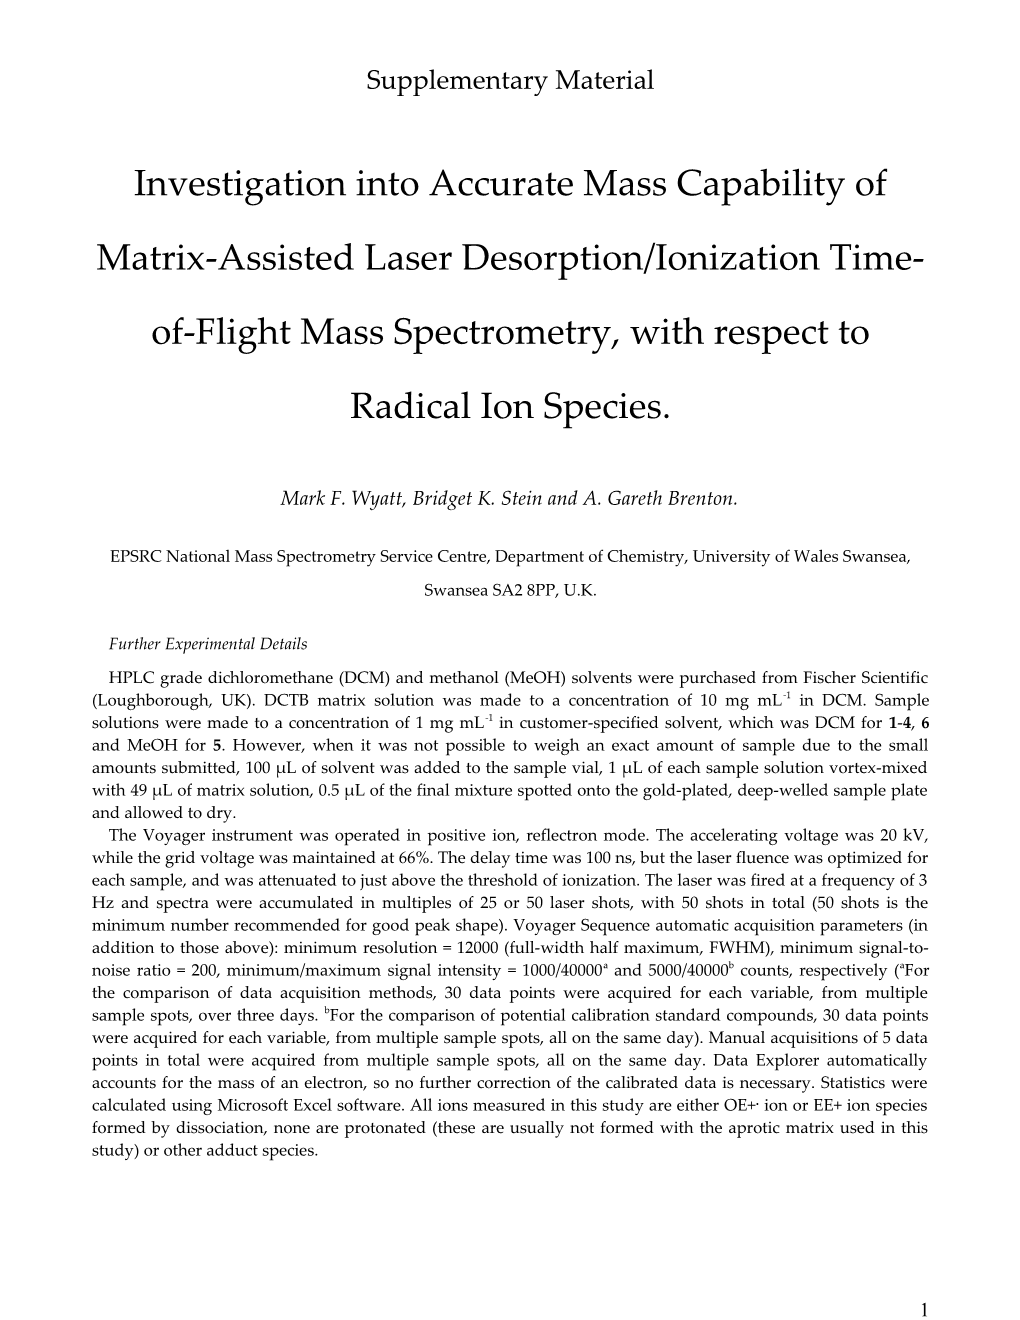 Investigation Into Accurate Mass Capability of Matrix-Assisted Laser Desorption/Ionization